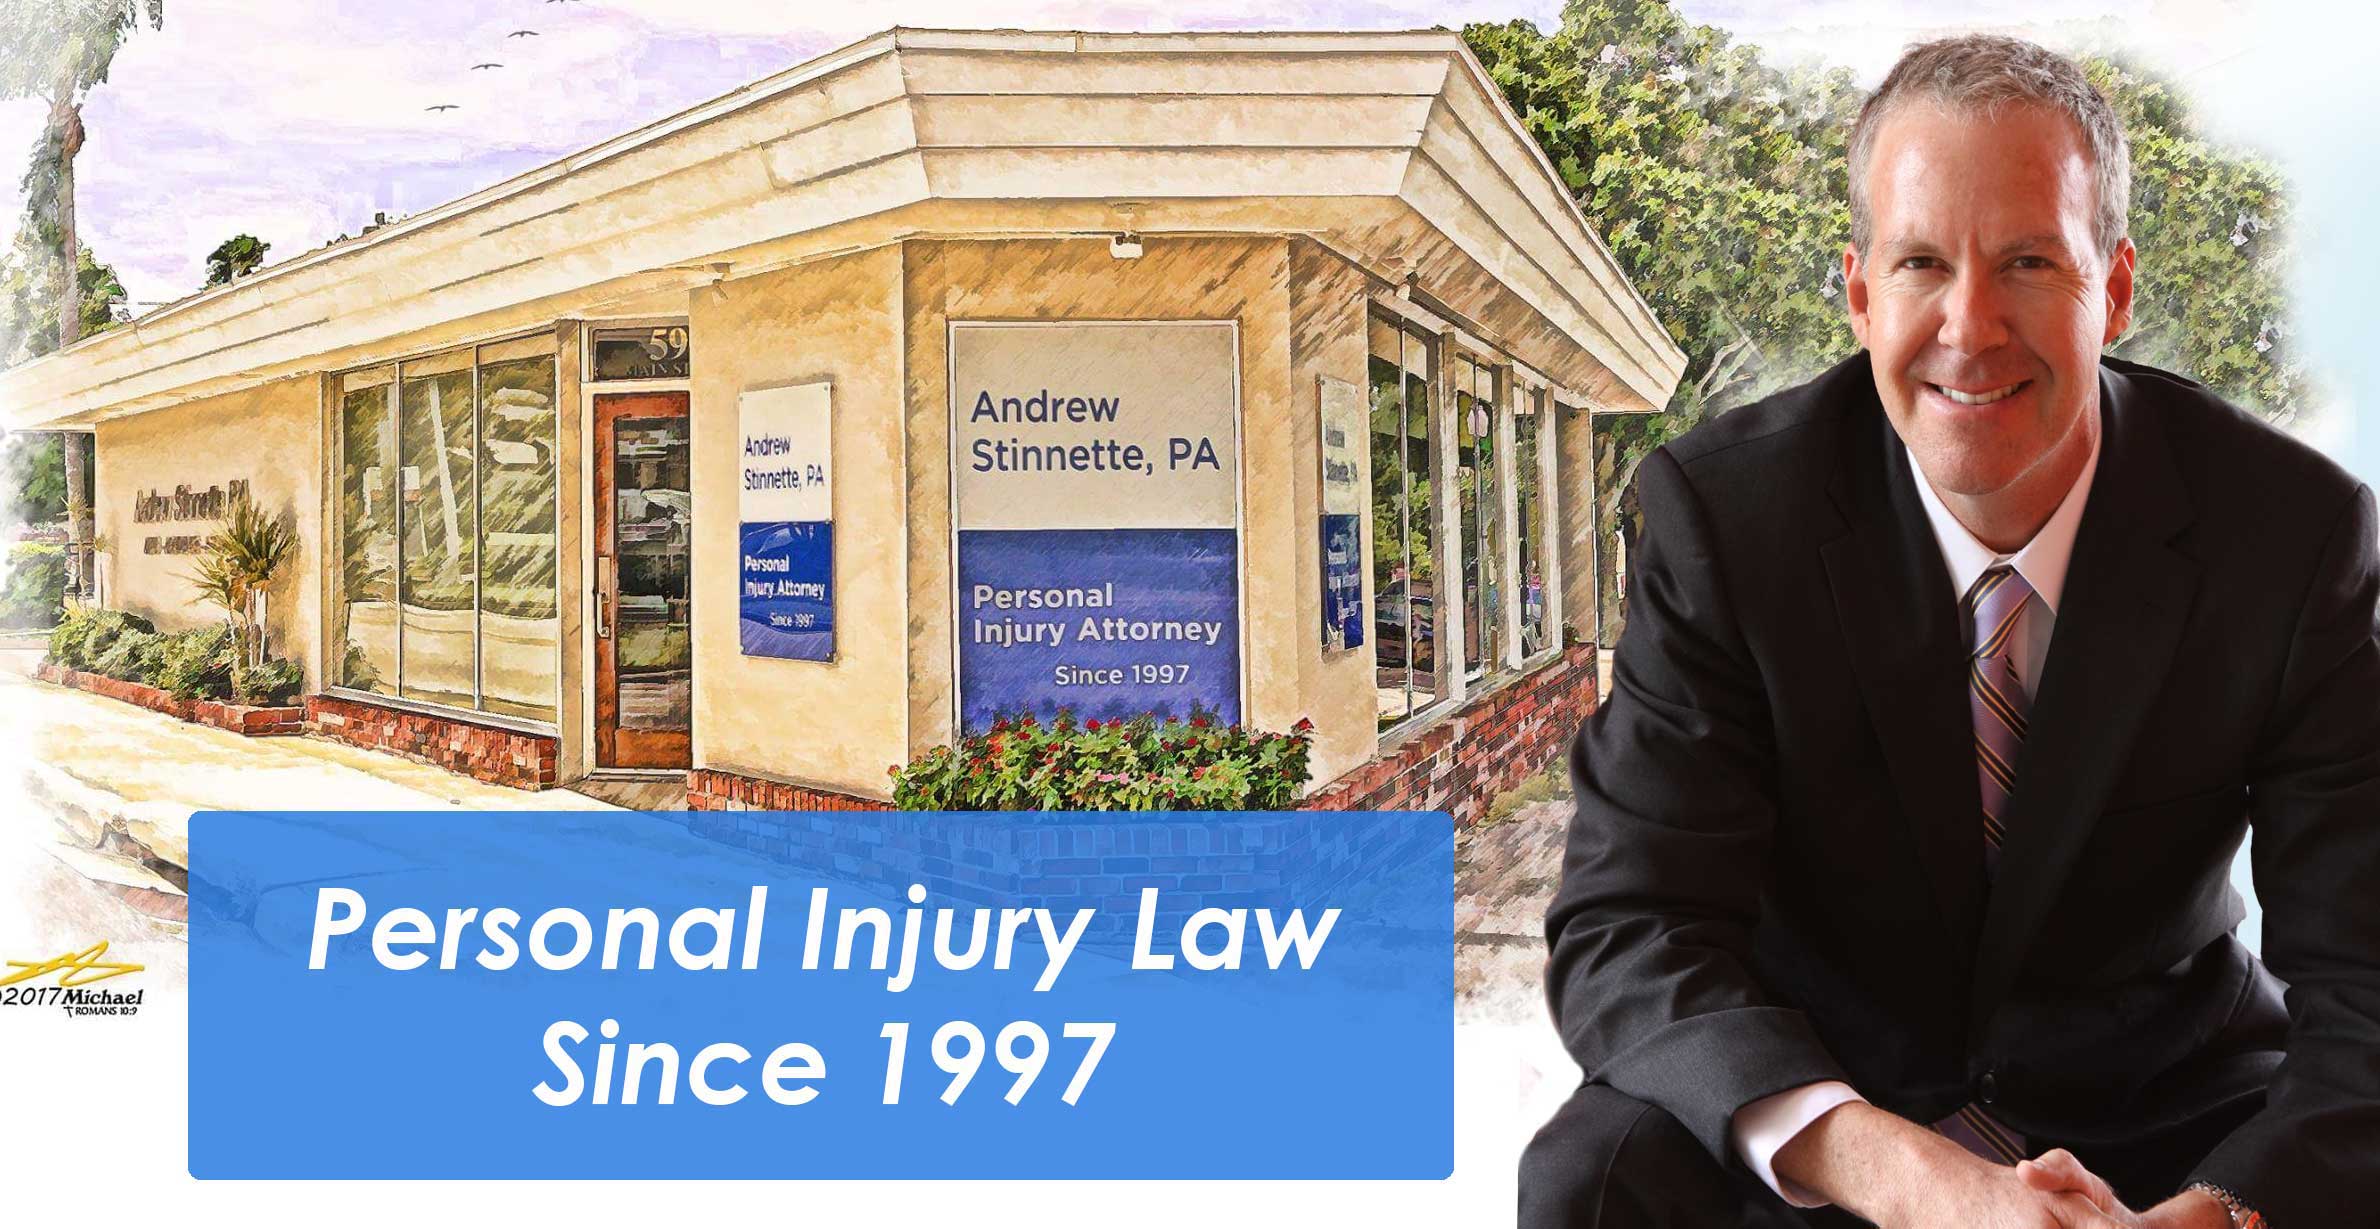 Personal injury law- lawyer serving Pinellas, Dunedin, Tarpon Springs, Oldsmar, Pinellas Park, St pete, Safety Harbor, FL florida,  Accident andd injuty attorneys